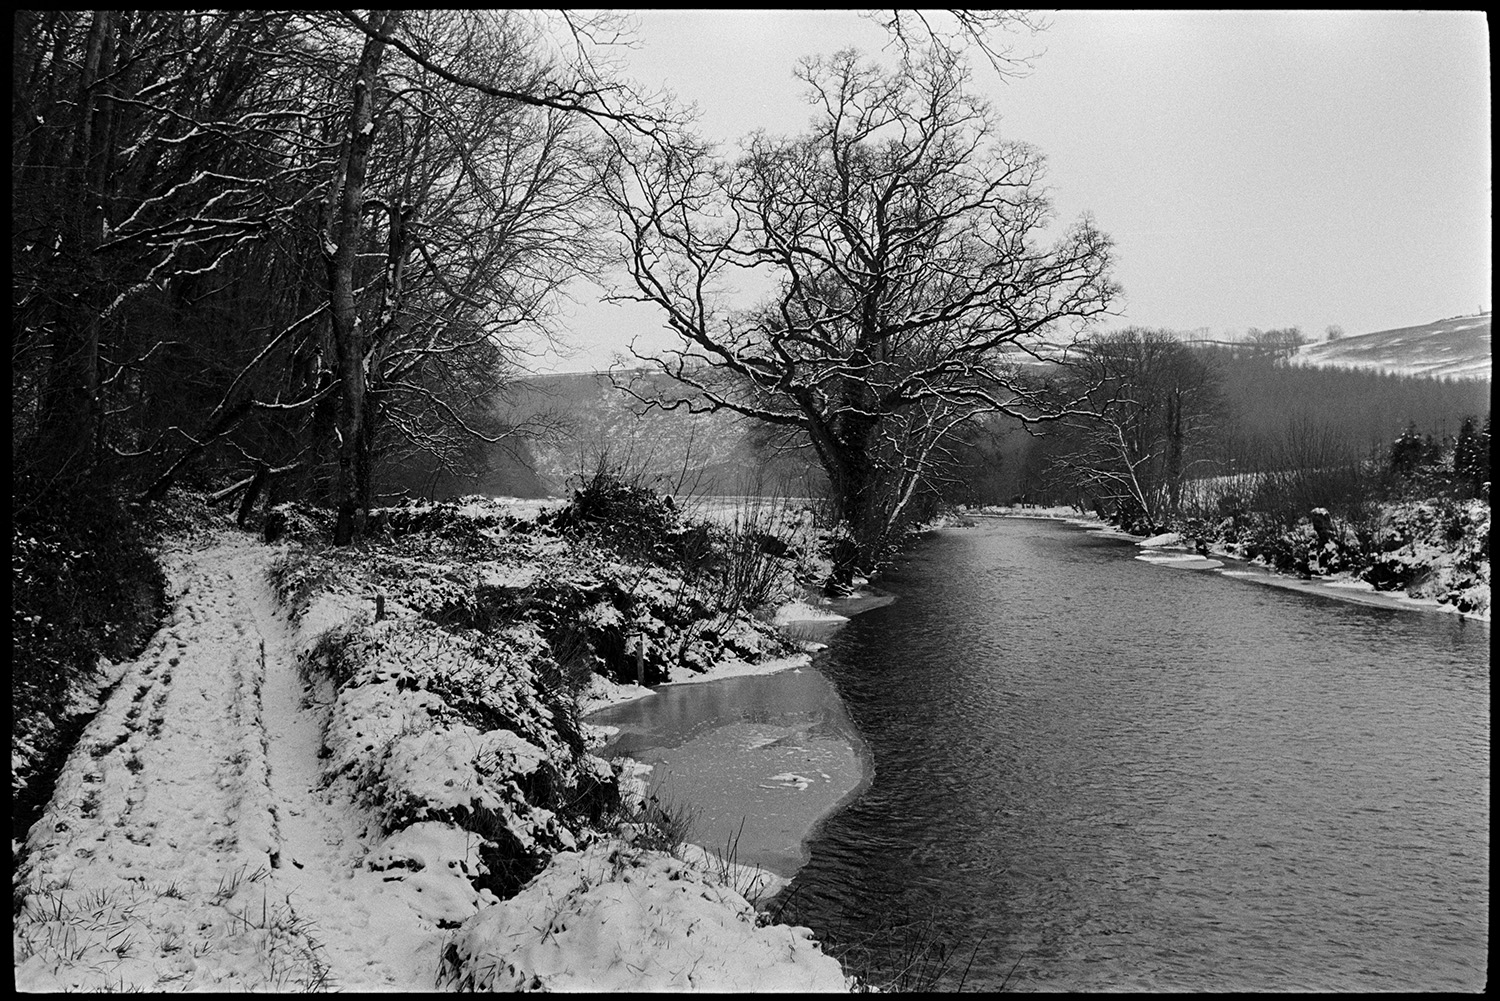 Snow, river and wood.
[River Torridge in winter with snowy banks and ice, and view of trees lining the river, at Halsdon, Dolton. A snow covered track is running alongside the river.].